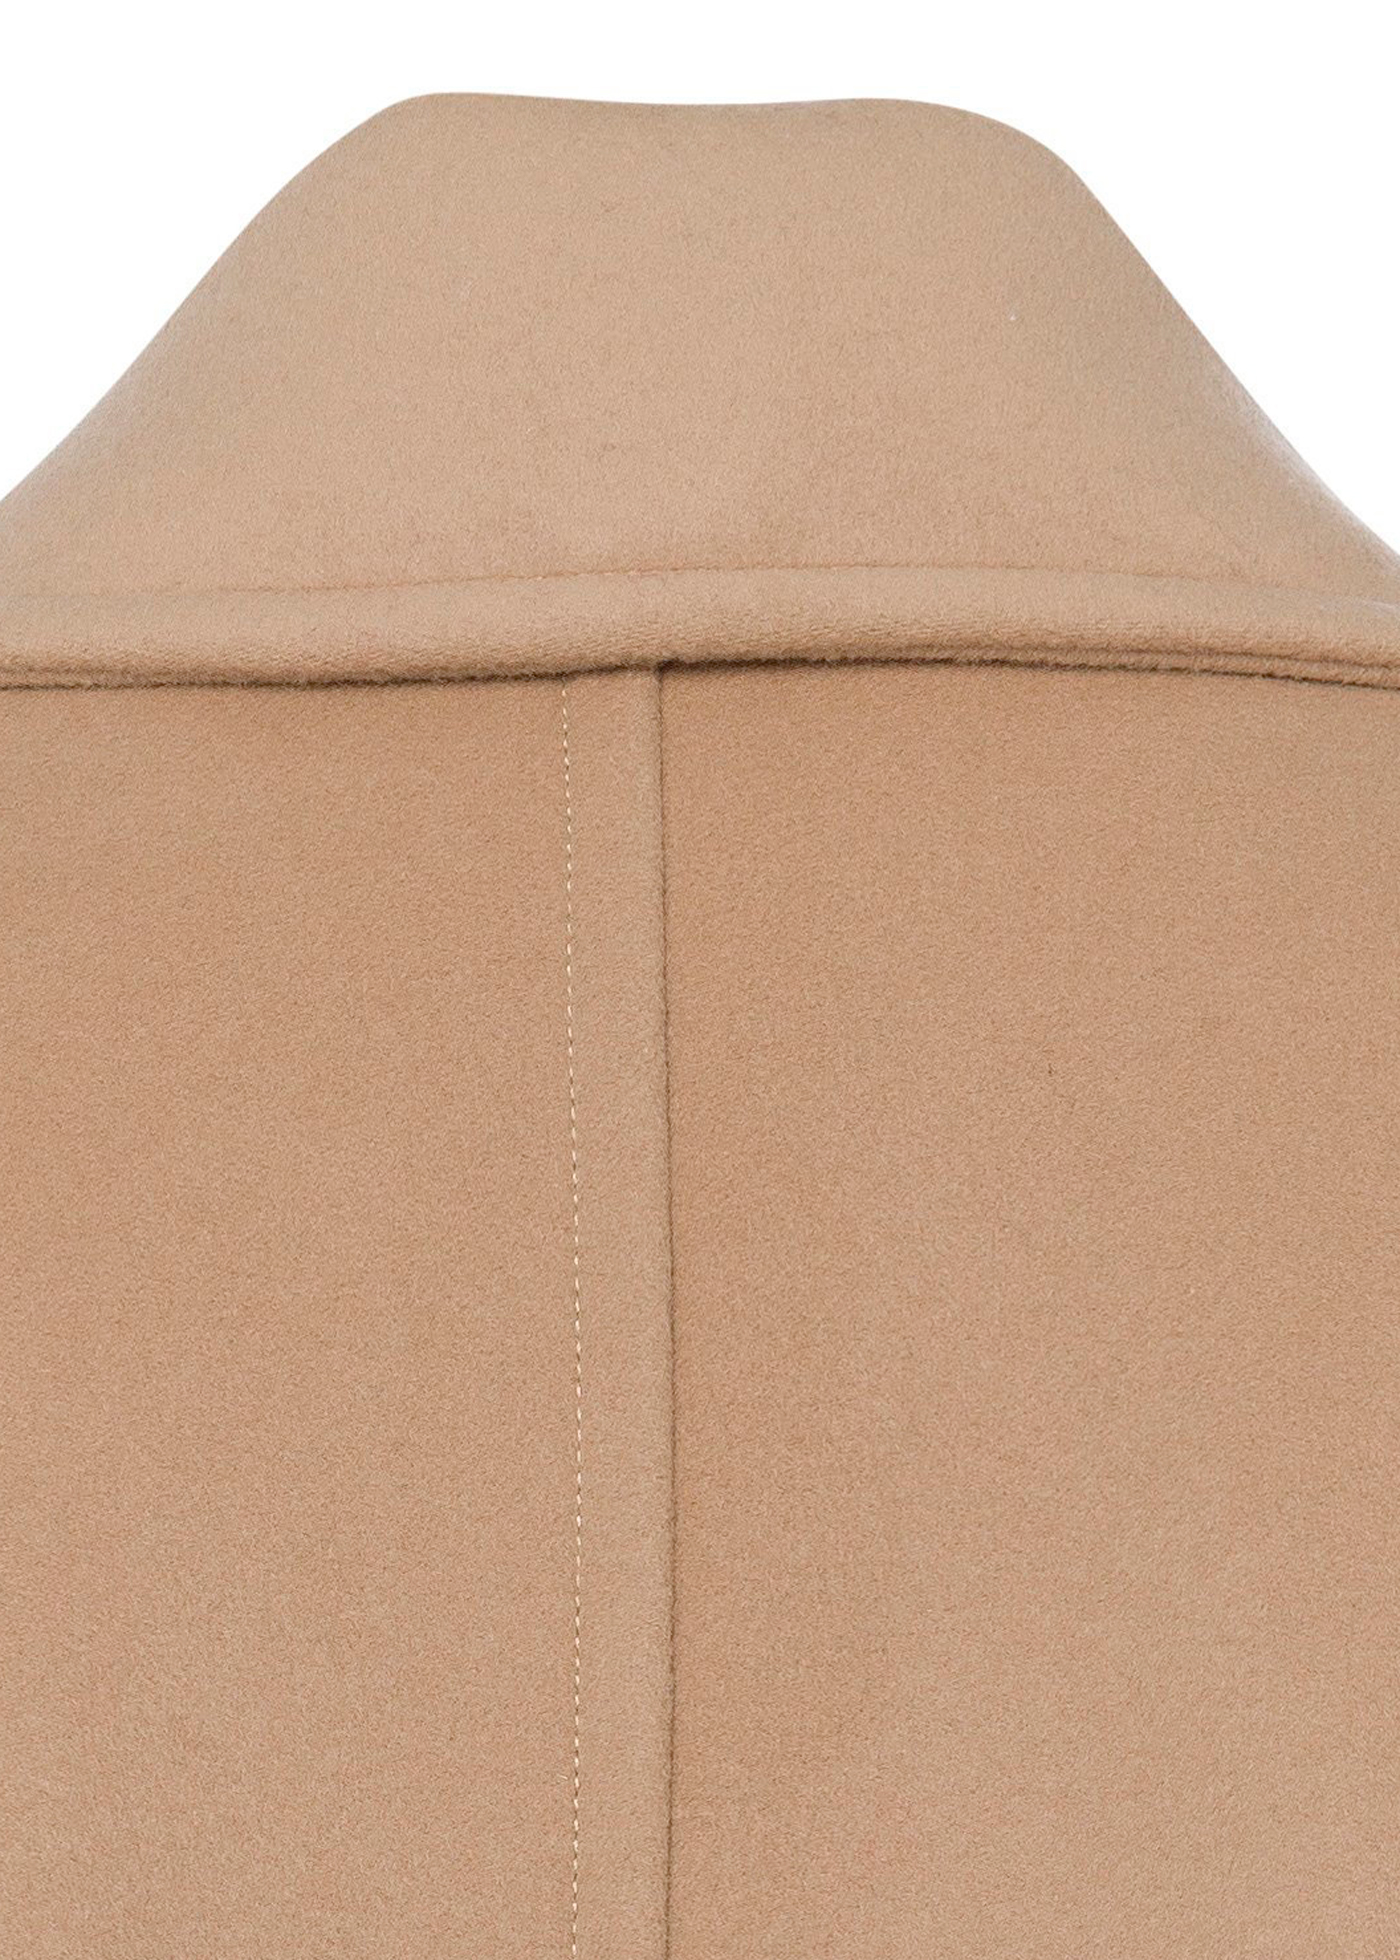 8 BTN WOOL CASHMERE PEACOAT image number 3